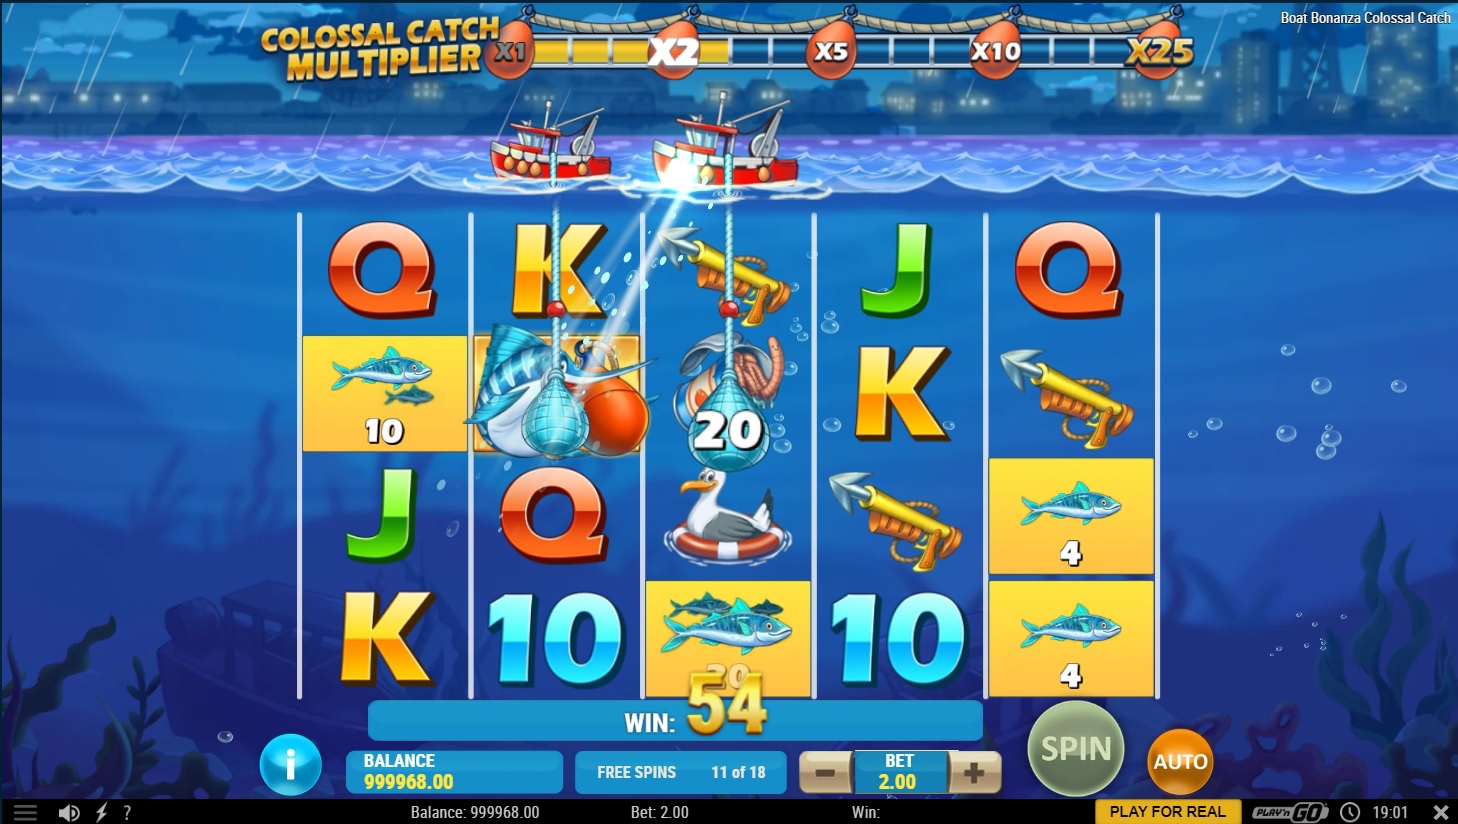 Boat Bonanza - Colossal Catch, Free spins feature